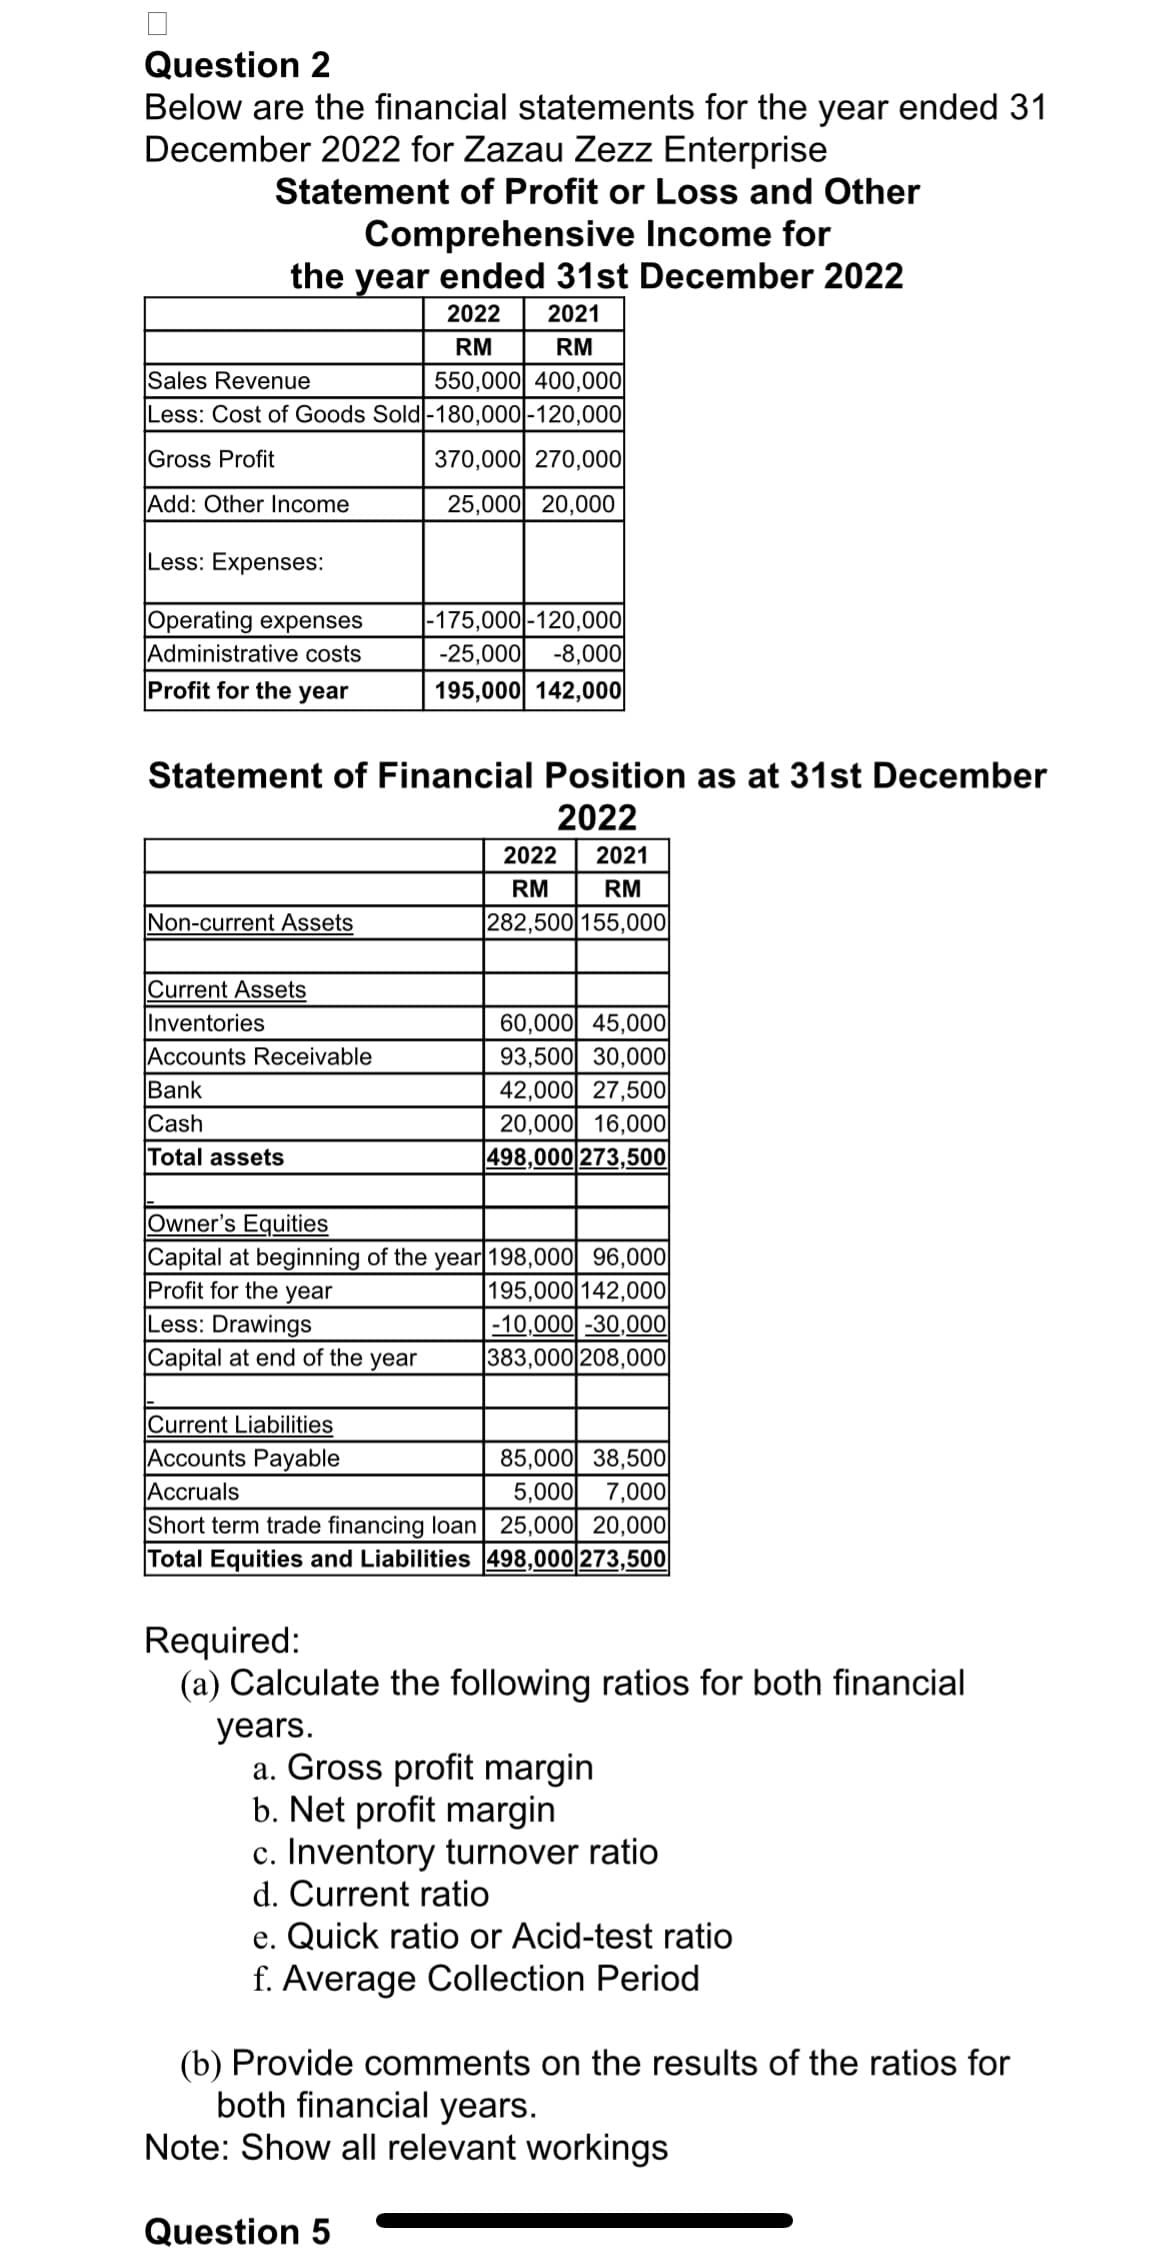 Question 2
Below are the financial statements for the year ended 31
December 2022 for Zazau Zezz Enterprise
Statement of Profit or Loss and Other
Comprehensive Income for
the year ended 31st December 2022
2022 2021
RM
RM
550,000 400,000
Sales Revenue
Less: Cost of Goods Sold -180,000-120,000
Gross Profit
Add: Other Income
Less: Expenses:
Operating expenses
Administrative costs
Profit for the year
Non-current Assets
Current Assets
Inventories
Accounts Receivable
Bank
Cash
Total assets
Statement of Financial Position as at 31st December
2022
Current Liabilities
Accounts Payable
Accruals
370,000 270,000
25,000 20,000
-175,000-120,000
years.
-25,000 -8,000
195,000 142,000
Owner's Equities
Capital at beginning of the year 198,000 96,000
Profit for the year
195,000 142,000
Less: Drawings
Capital at end of the year
2022
2021
RM
RM
282,500 155,000
Question 5
60,000 45,000
93,500 30,000
42,000 27,500
20,000 16,000
498,000 273,500
85,000 38,500
5,000 7,000
Short term trade financing loan 25,000 20,000
Total Equities and Liabilities 498,000 273,500
-10,000-30,000
383,000 208,000
Required:
(a) Calculate the following ratios for both financial
a. Gross profit margin
b. Net profit margin
c. Inventory turnover ratio
d. Current ratio
e. Quick ratio or Acid-test ratio
f. Average Collection Period
(b) Provide comments on the results of the ratios for
both financial years.
Note: Show all relevant workings